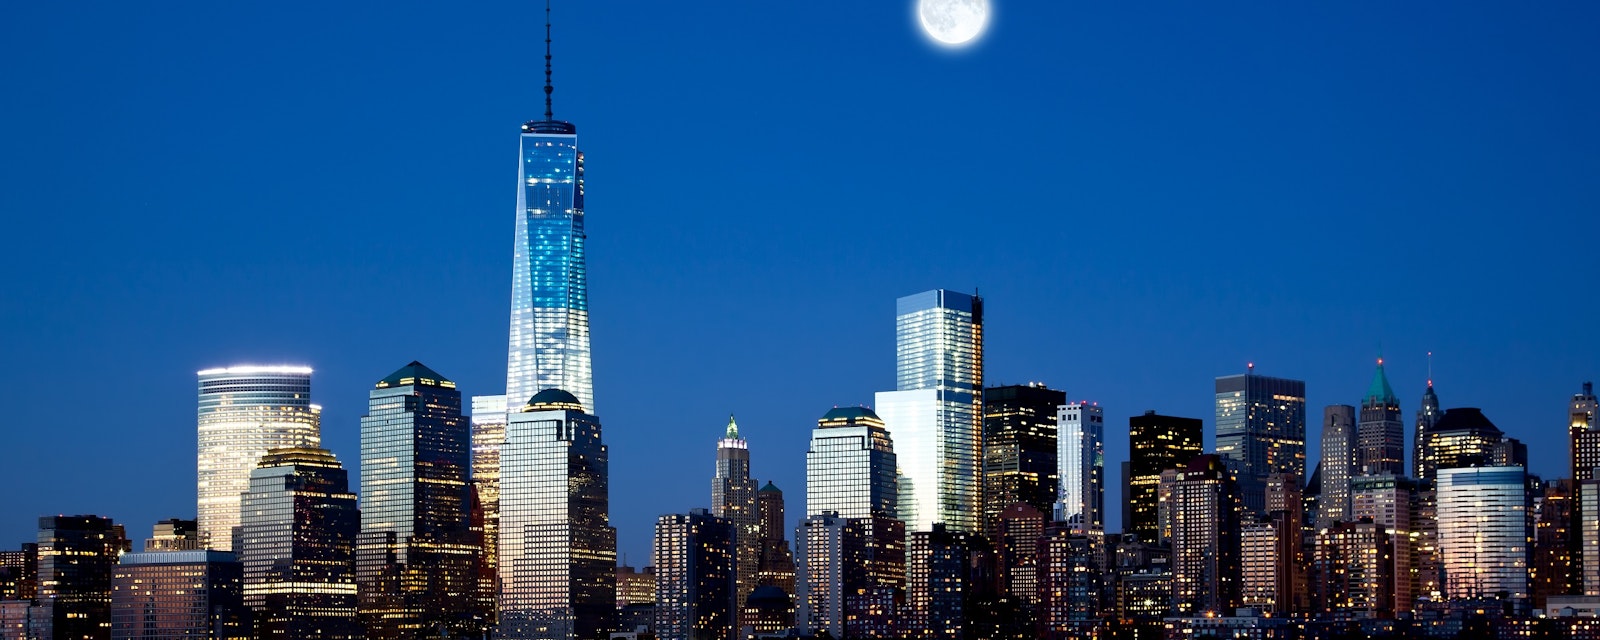 The,New,Freedom,Tower,And,Lower,Manhattan,Skyline,At,Night